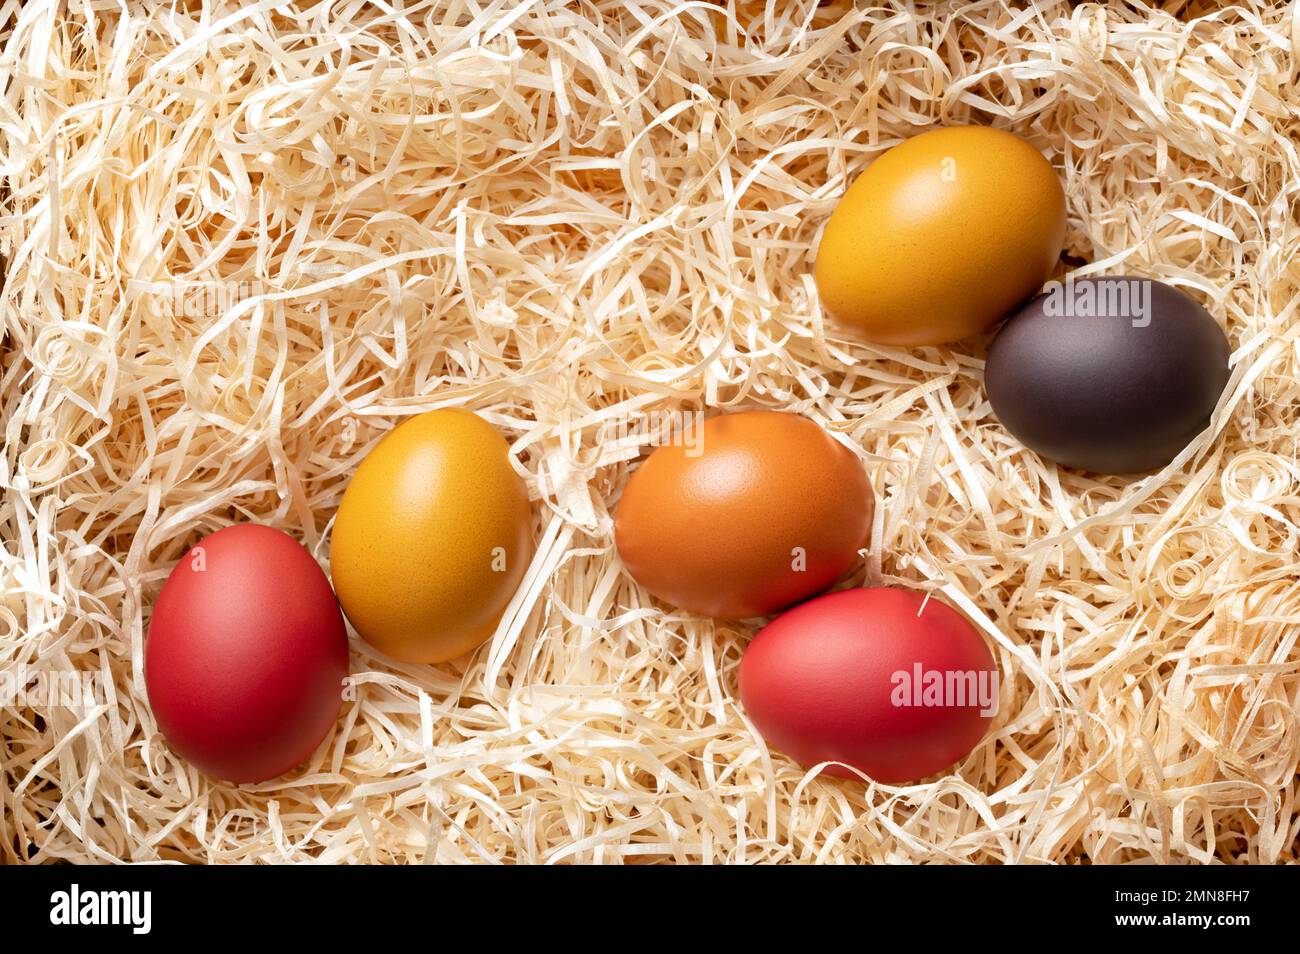 Colorful dyed Easter eggs in a wood wool nest, from above. Paschal eggs, hard boiled, colored chicken eggs, in a bed of wood slivers, cut from logs. Stock Photo